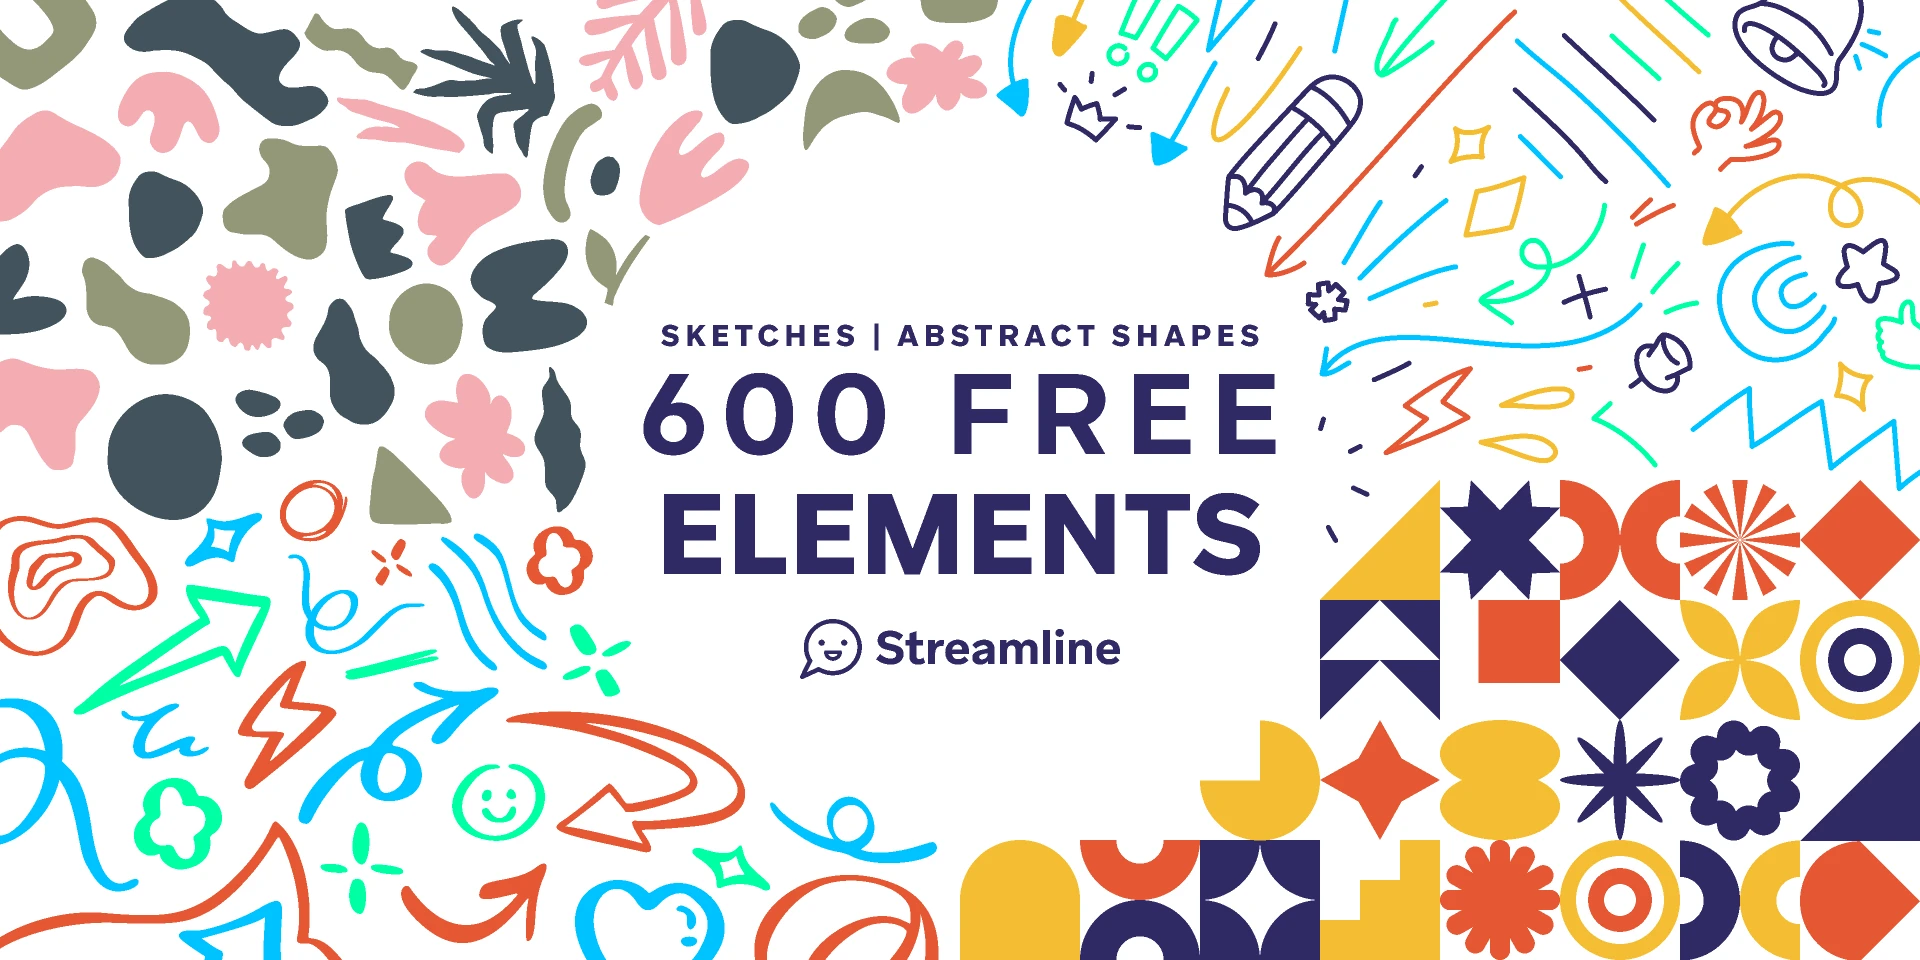 Free Elements (Shapes, Sketches) for Figma and Adobe XD